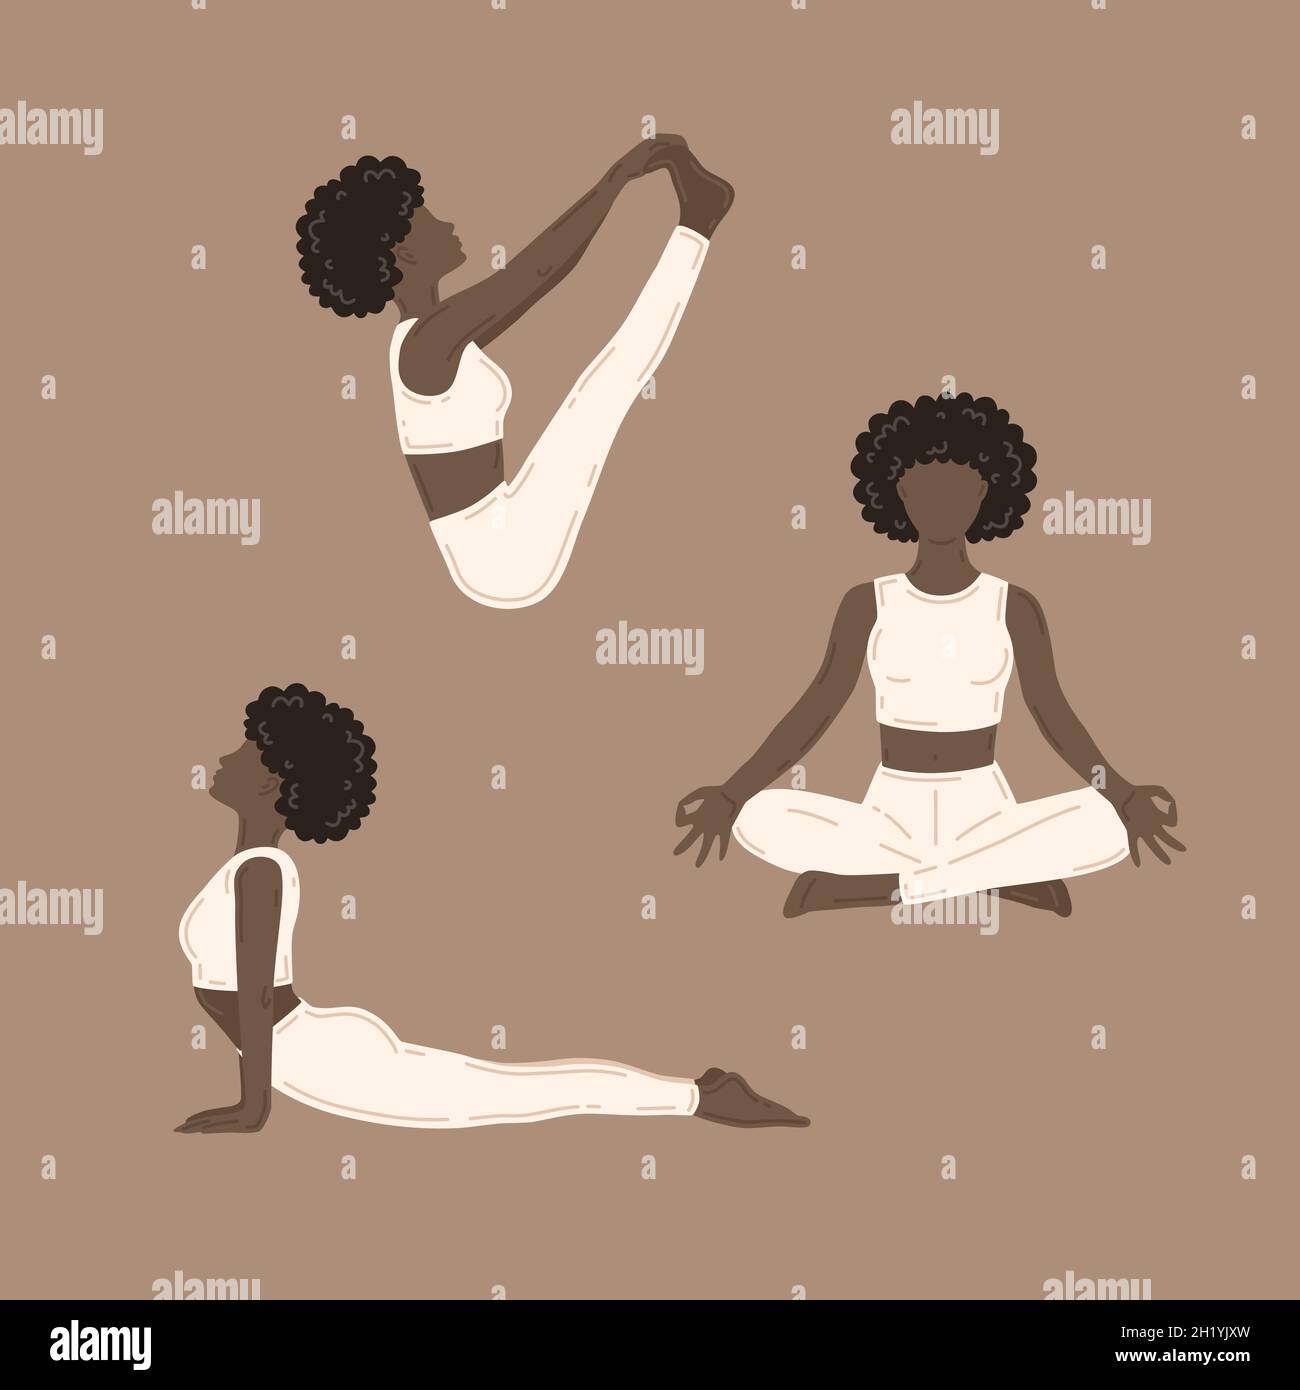 Young slim women doing yoga exercises. Collection of vector illustrations Stock Vector